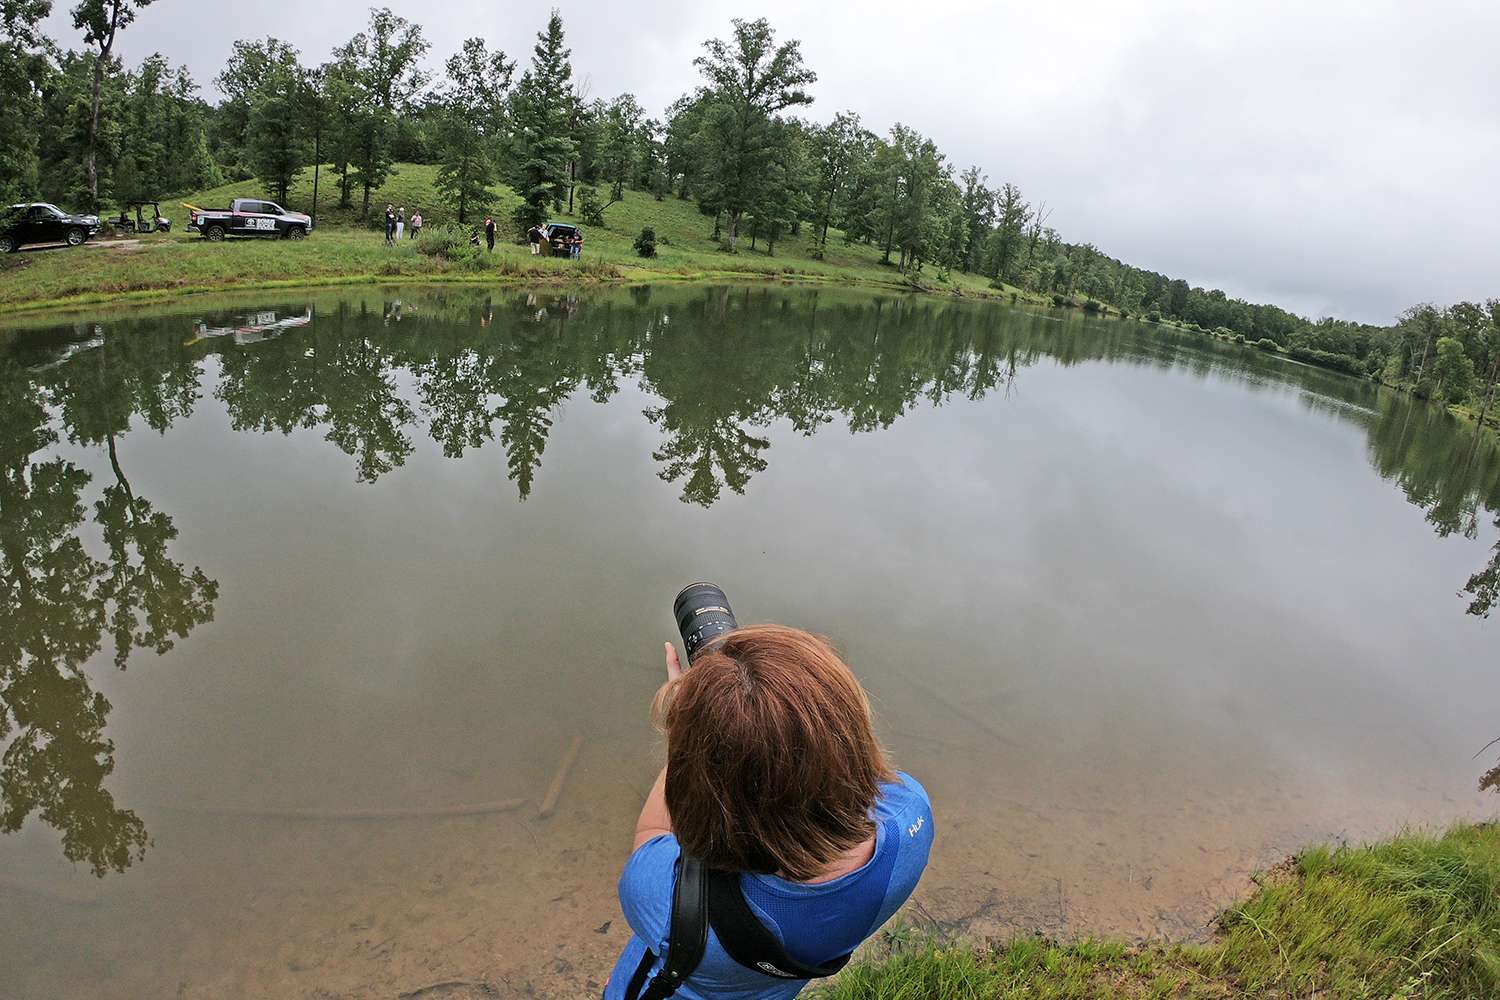 As the Forty Creek crew and Bassmaster photographer Gary Tramontina were getting things set up for the day's shoot, Bassmaster Art Director Laurie Tisdale found a unique perspective for additional photos. 